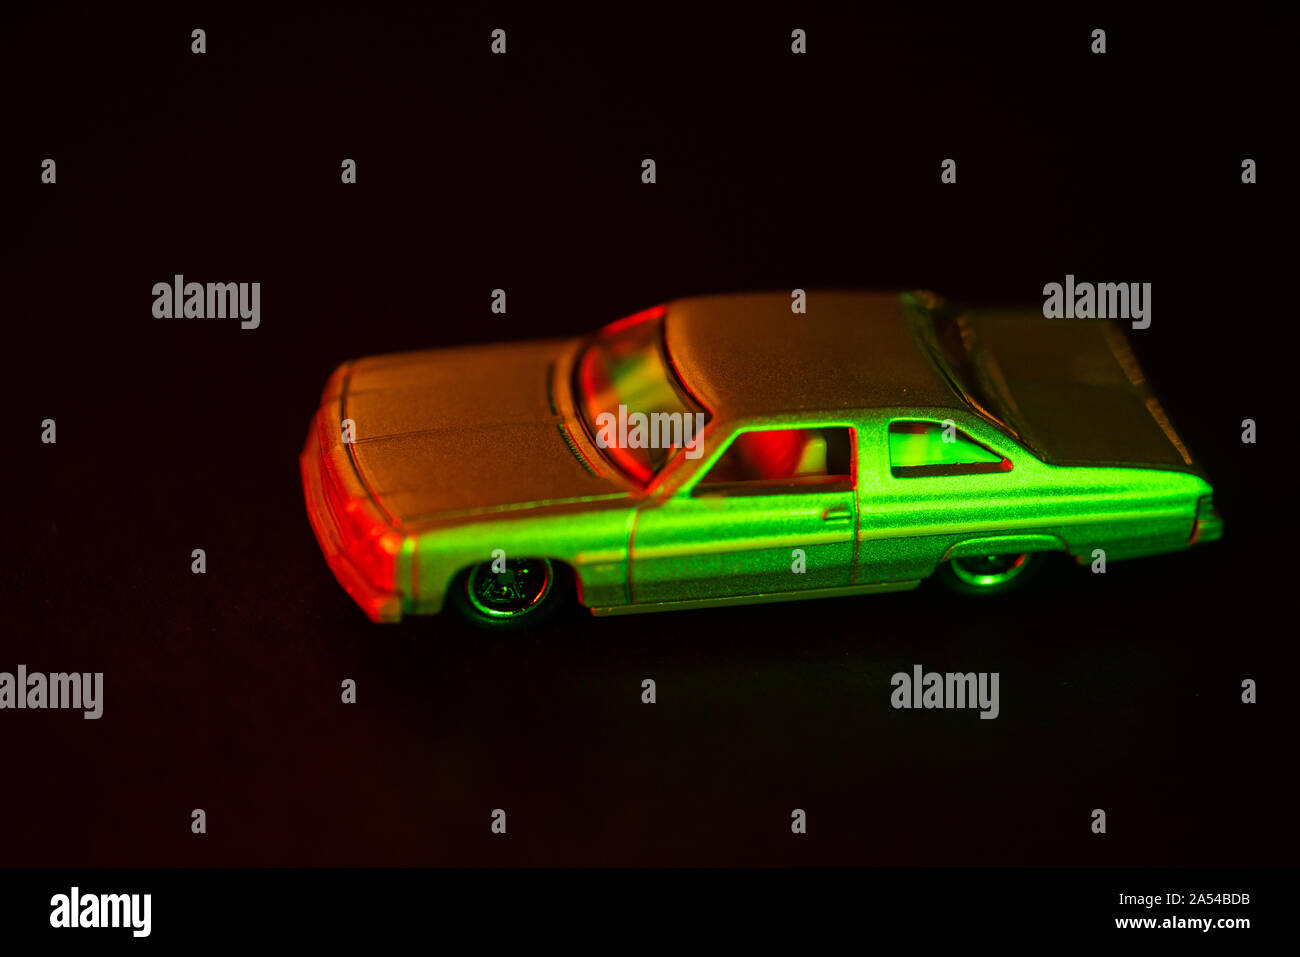 A toy car under red and green light. Stock Photo